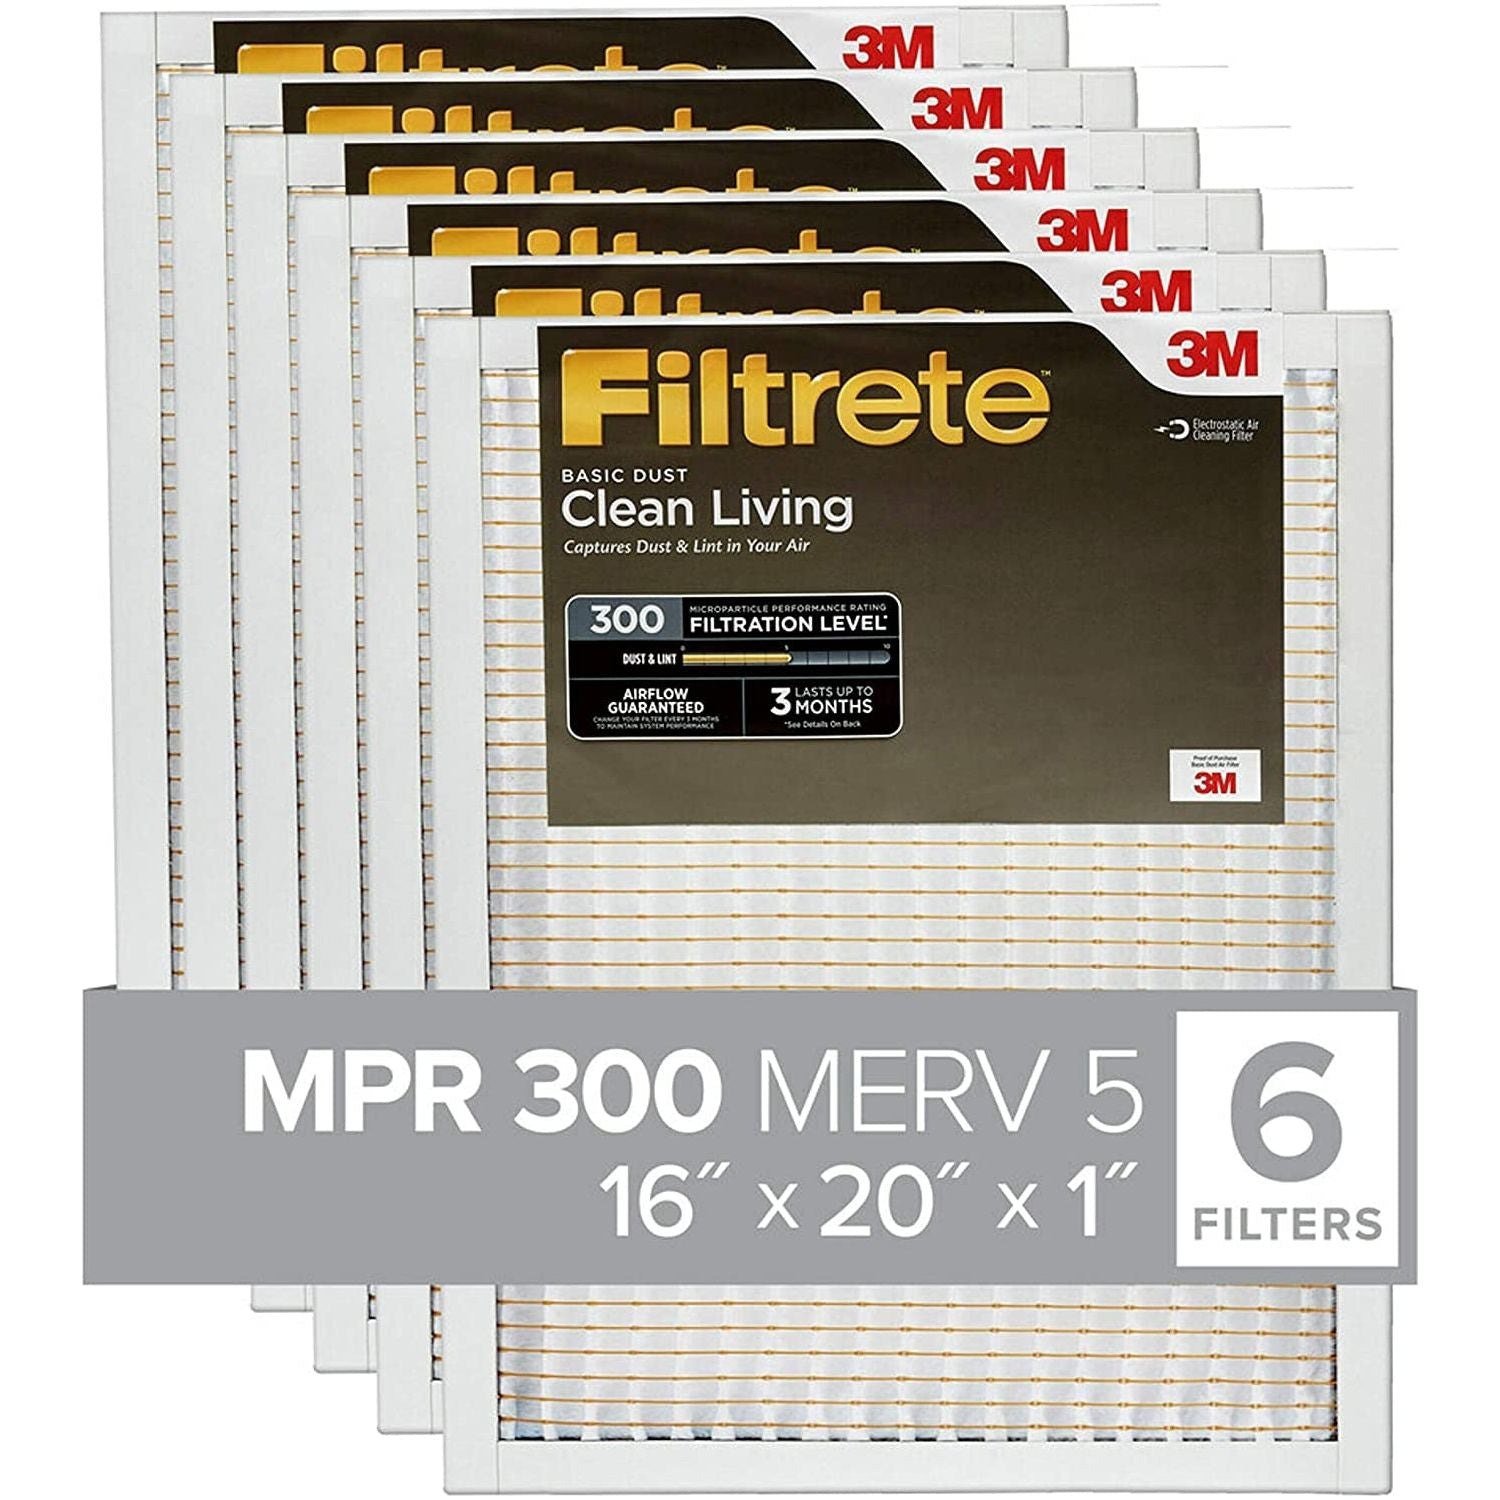 Filtrete 16X20X1 Air Filter, MPR 300, MERV 5, Clean Living Basic Dust 3-Month Pleated 1-Inch Air Filters, 6 Filters